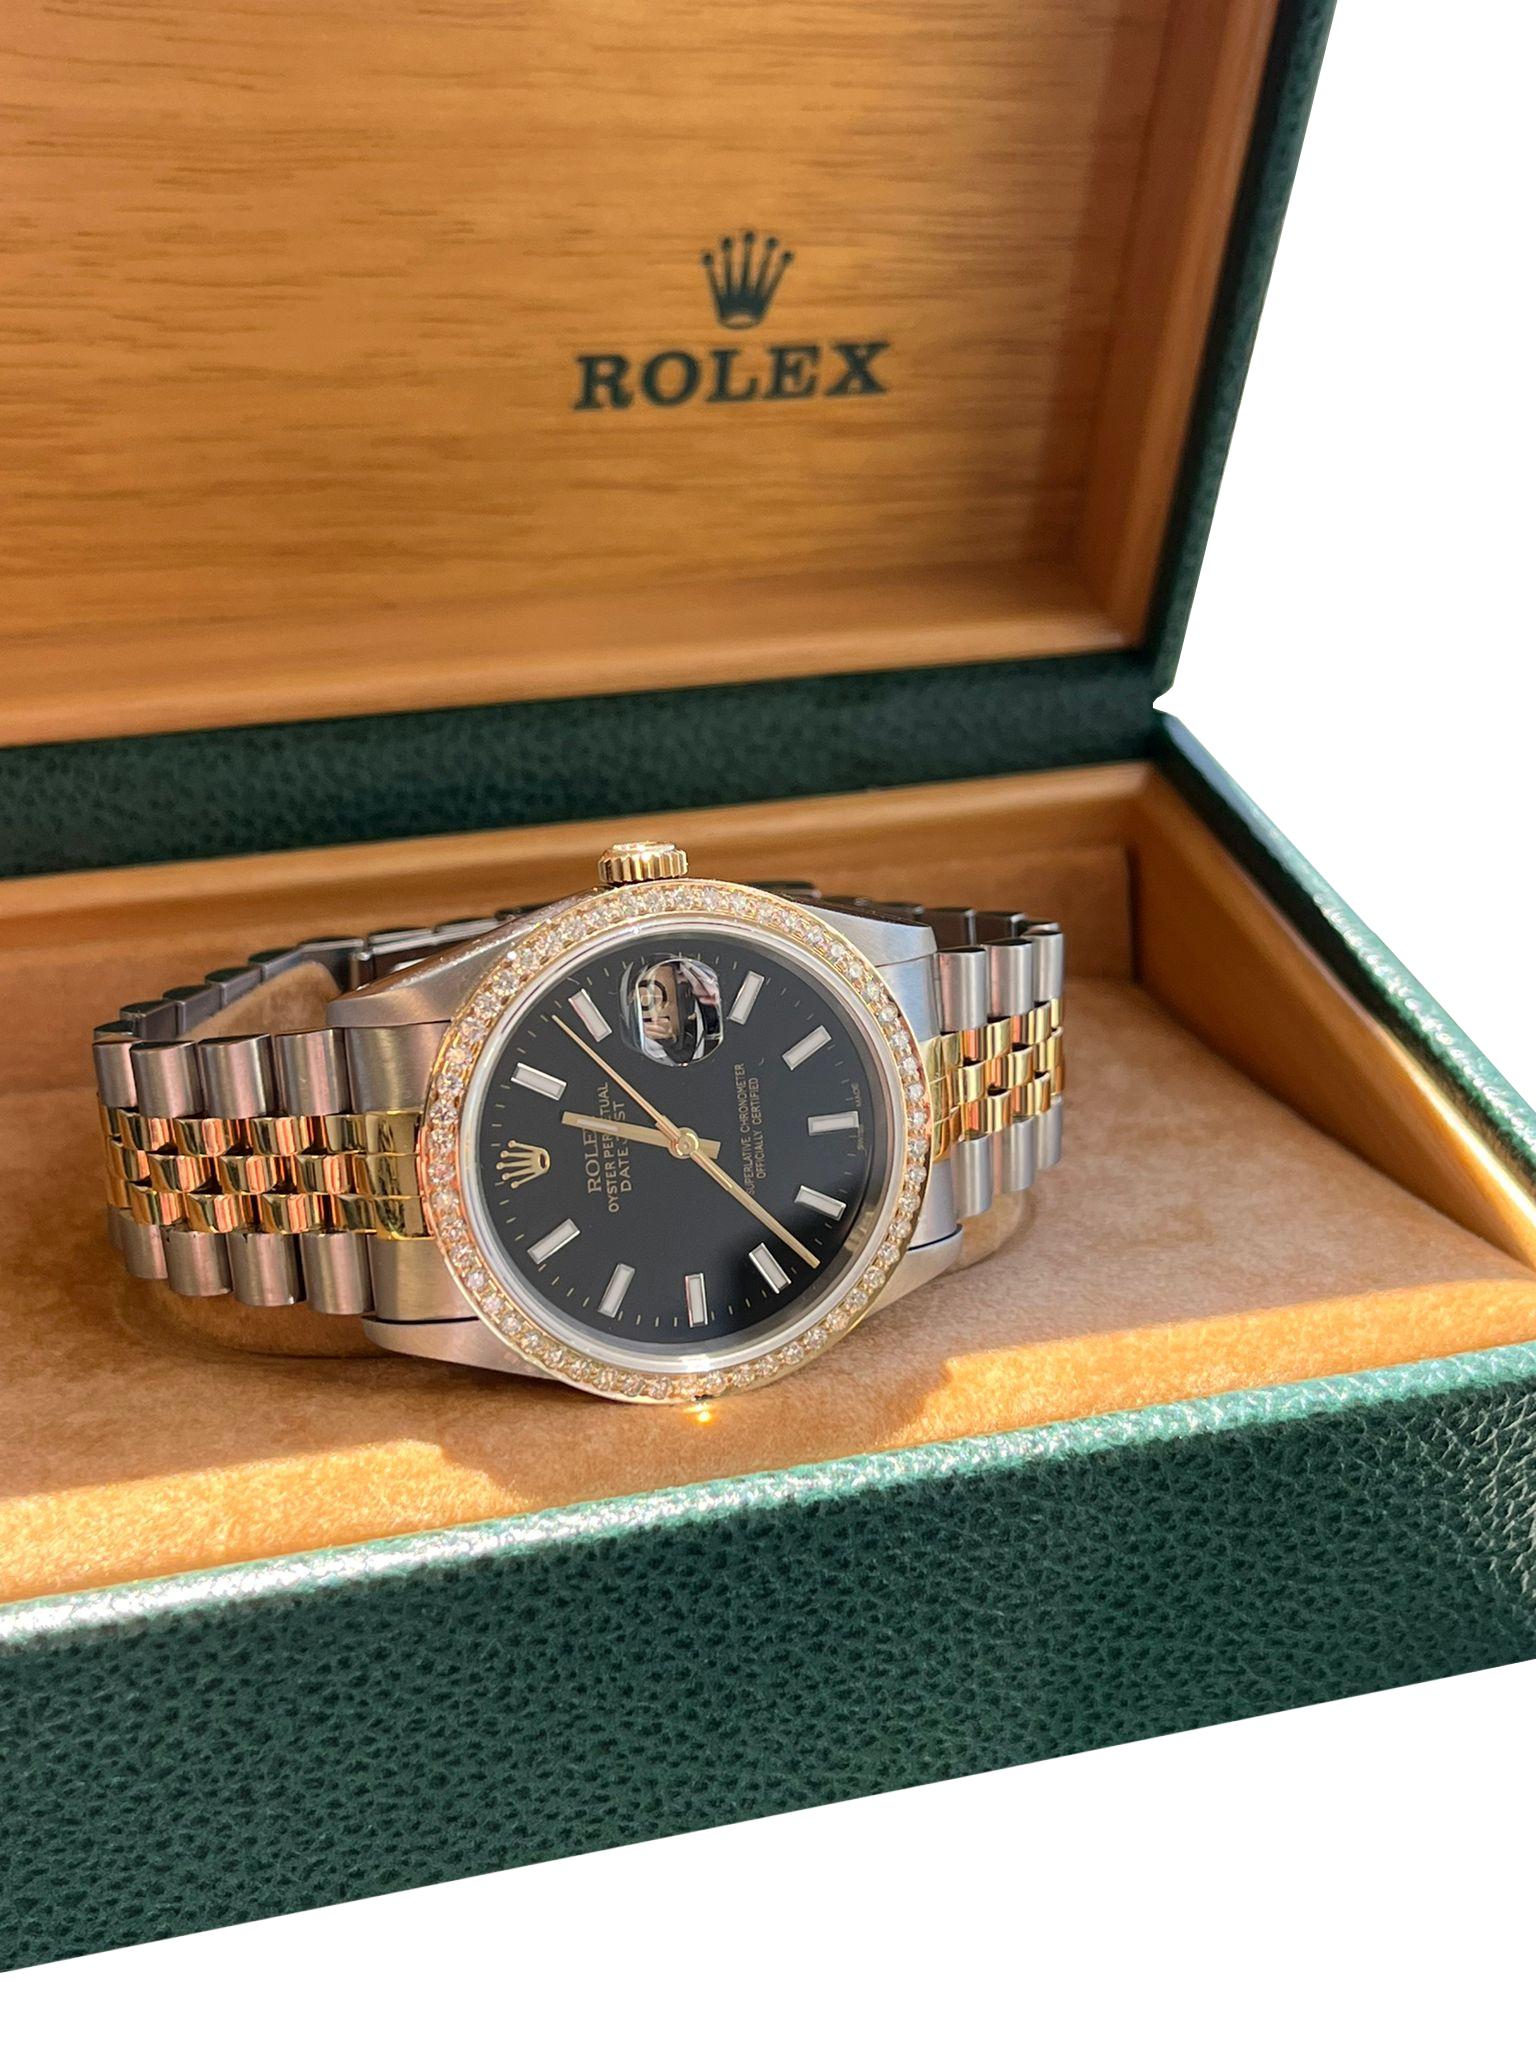 Rolex Datejust Steel Yellow Gold Black Dial with Custom Aftermarket Diamond Bezel Mens Watch 16233. Officially certified chronometer self-winding movement. Stainless steel case 36 mm in diameter. Rolex logo on an 18K yellow gold crown. 18k yellow